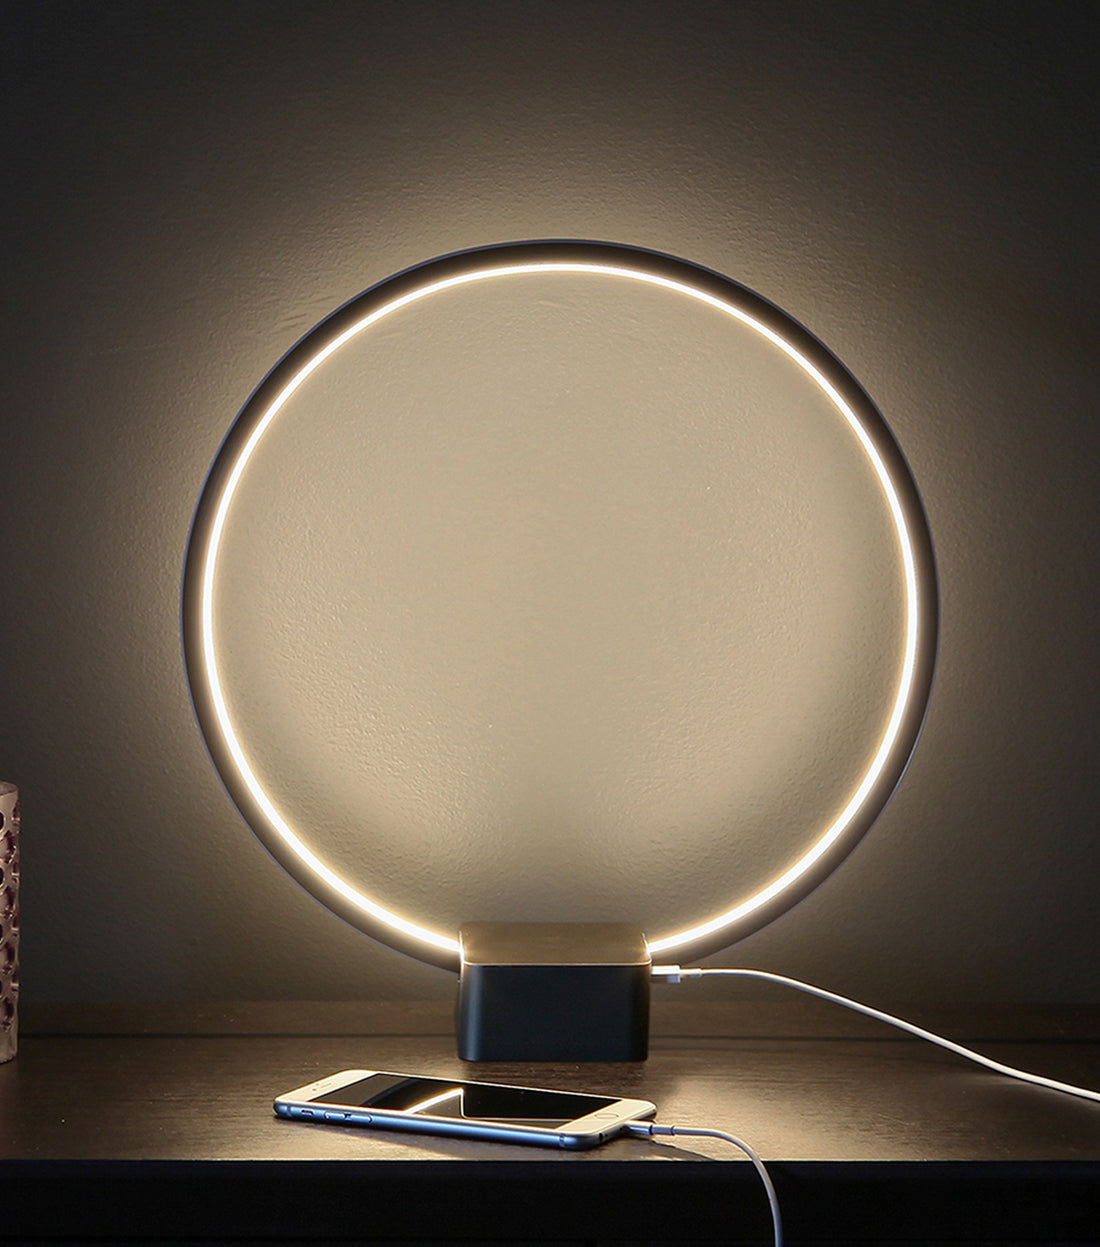 Brightech Circle - LED Modern Bedroom Nightstand Lamp - Super Bright Bedside Table Reading Light, Dimmable to Night Light - Great On Side & End Tables - USB Port